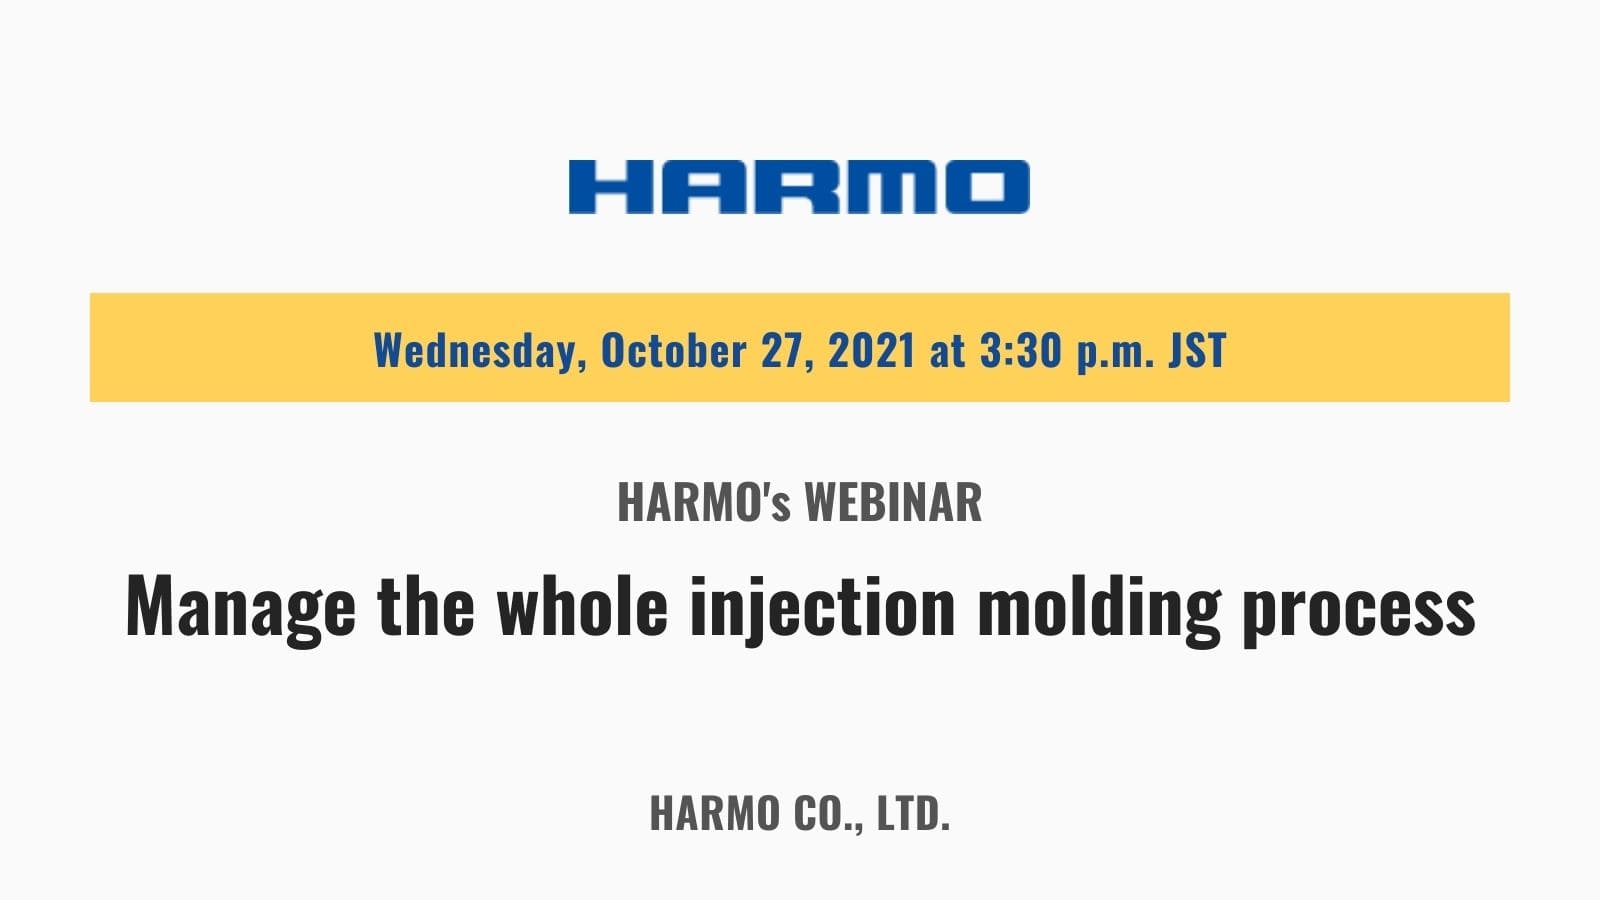 HARMO's Webinar｜Manage the whole injection molding process